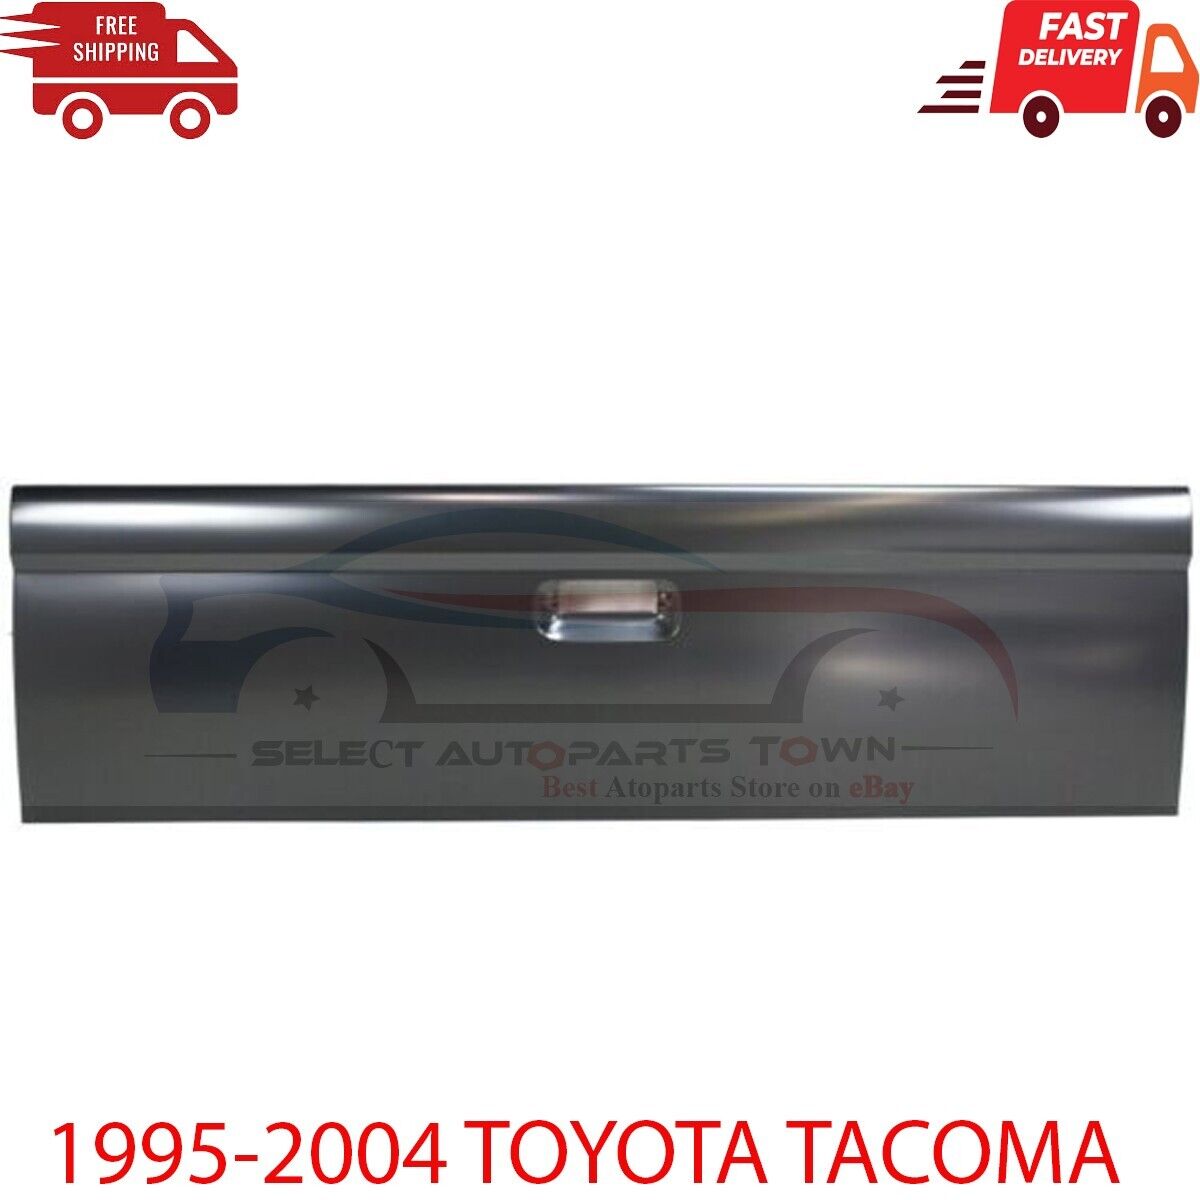 New Fits 95-04 TOYOTA TACOMA Pickup Truck Rear Tailgate 6570004030 TO1900106